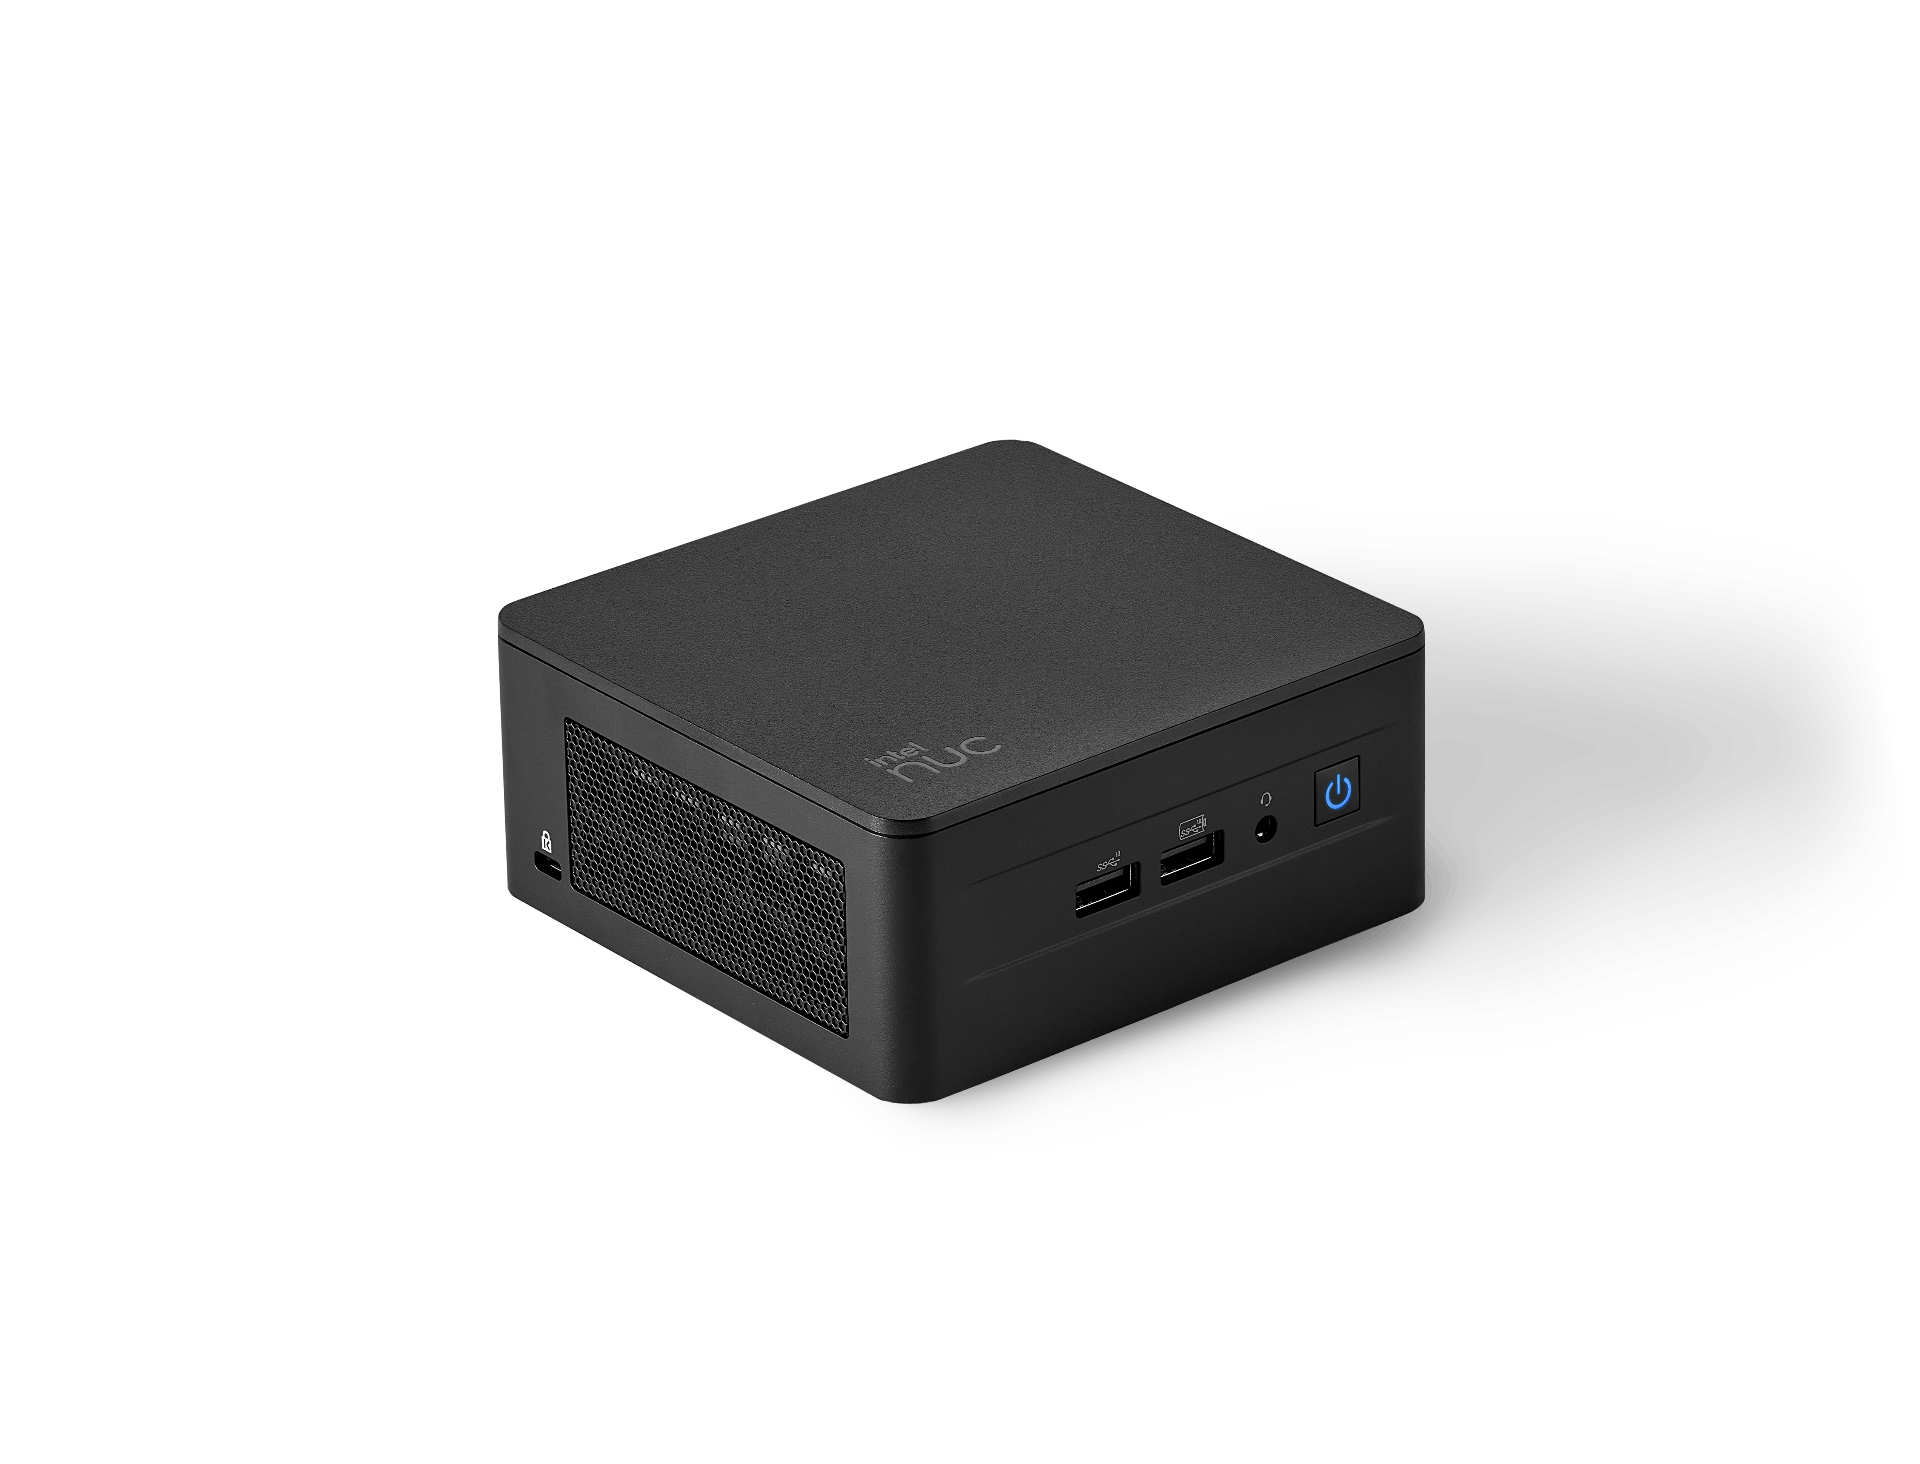  Mini PC Barebone: Intel 13th Gen. NUC, i7-1360P up to 5.00 GHz, 18MB Cache, DDR4(0/2), M.2 Drive & 2.5" HDD, Wi-Fi 6E + Bluetooth, 2xHDMI/2xUSB-C <br><font color='red'>(NO POWER CABLE, optional CB PW 3P power cable)  